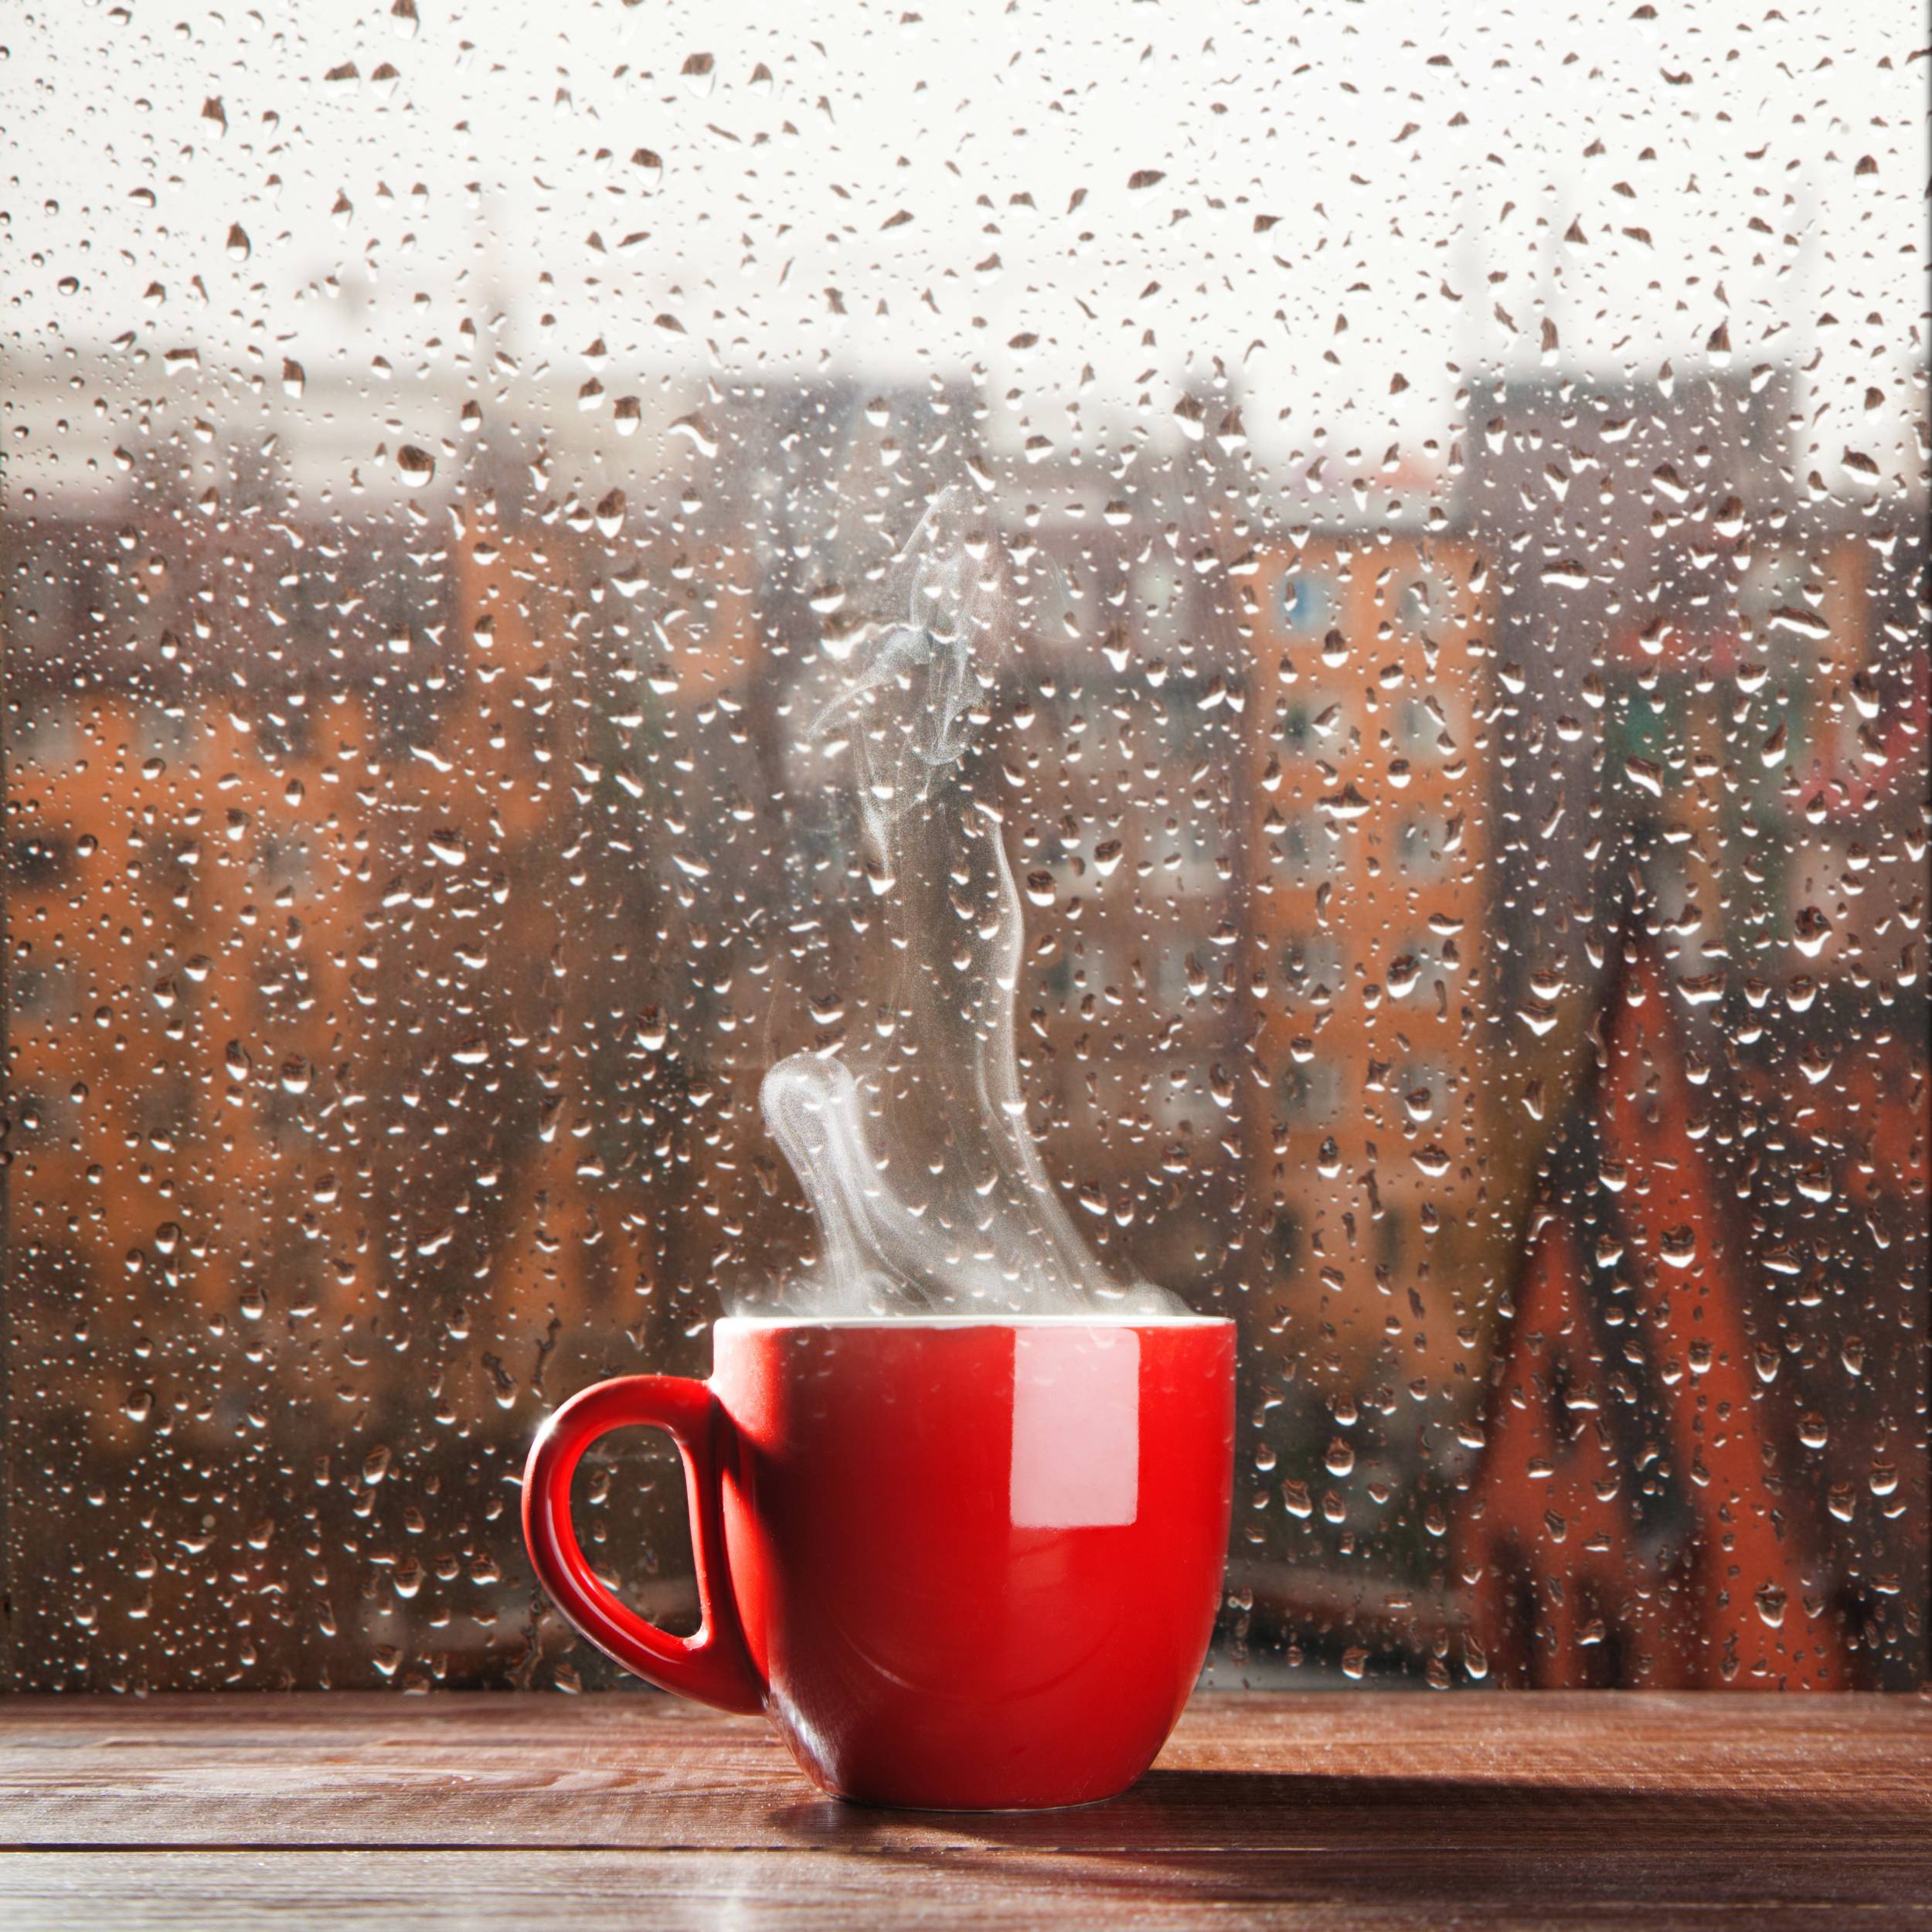 Awesome Rainy Day Image Collection: Rainy Day Wallpaper